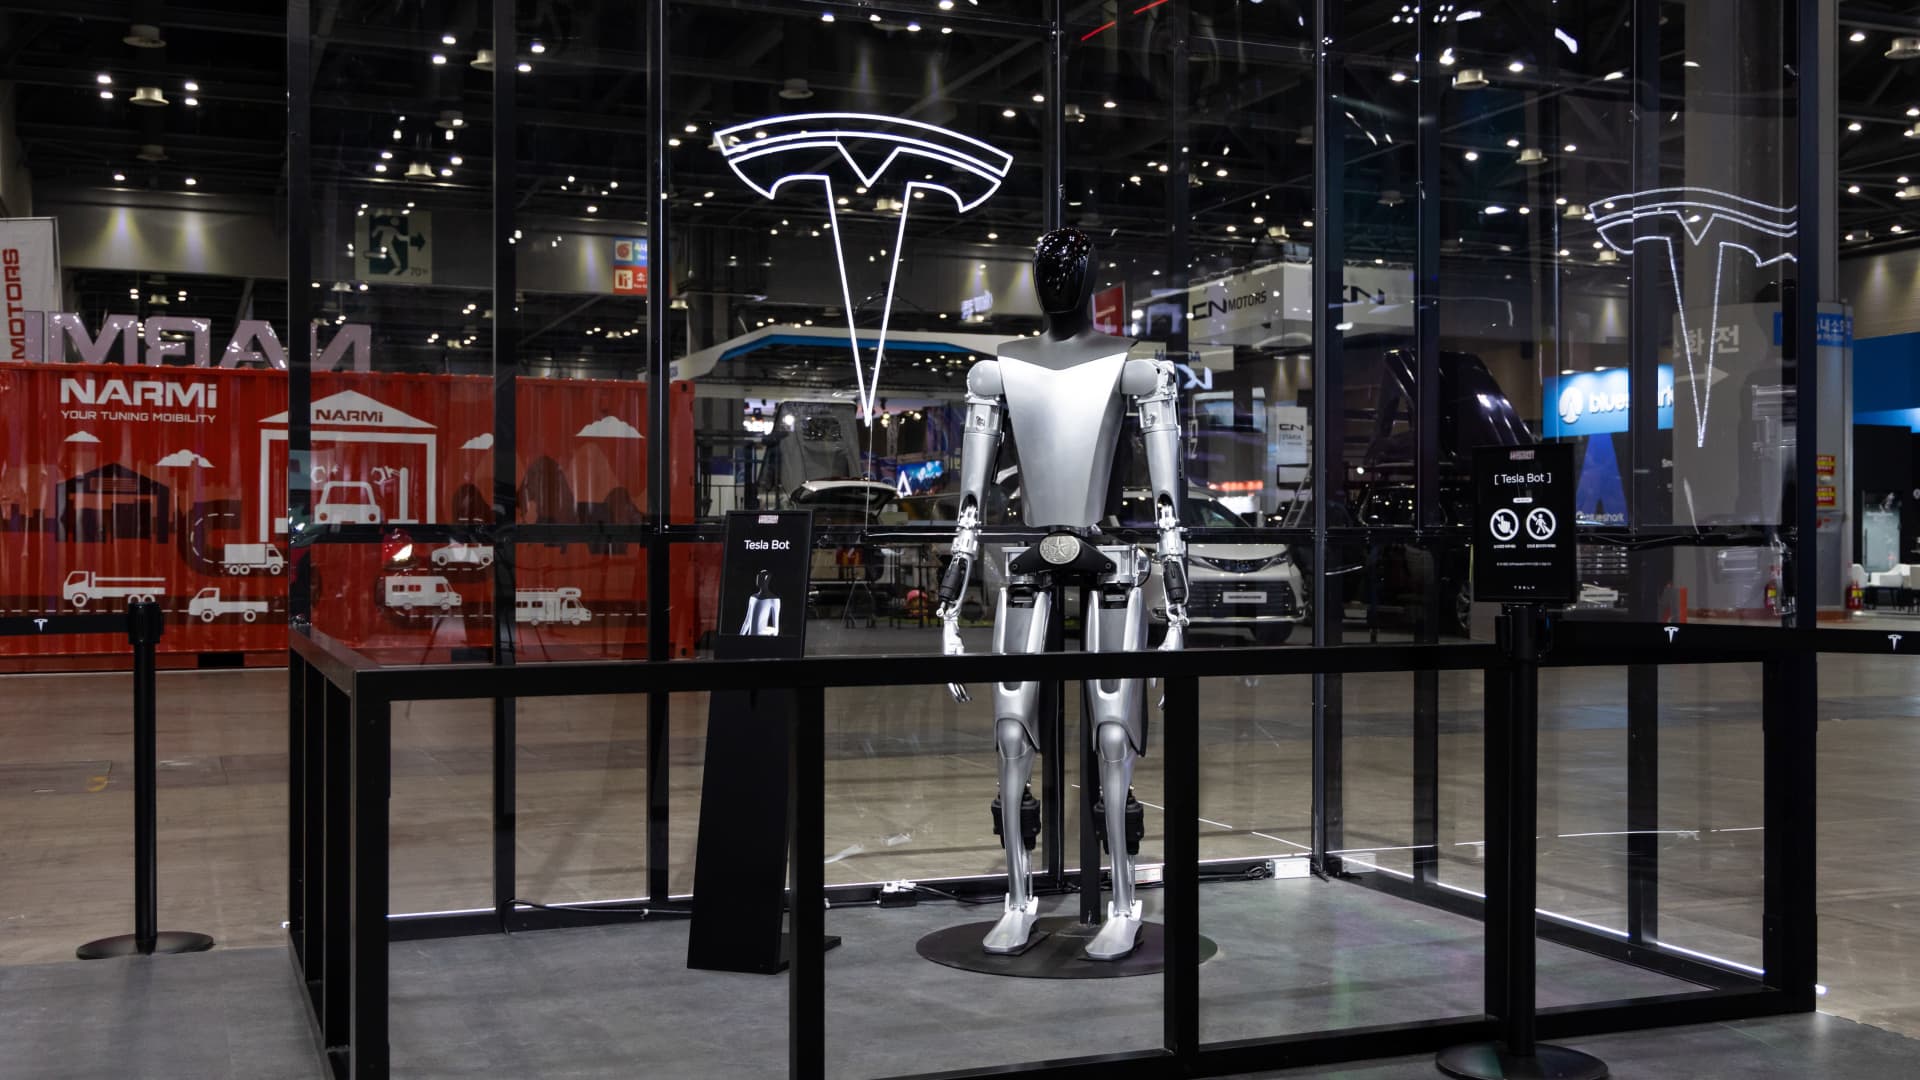 A mockup of Tesla Inc.'s planned humanoid robot Optimus on display during the Seoul Mobility Show in Goyang, South Korea, on Thursday, March 30, 2023. The motor show will continue through April 9. Photographer: SeongJoon Cho/Bloomberg via Getty Images